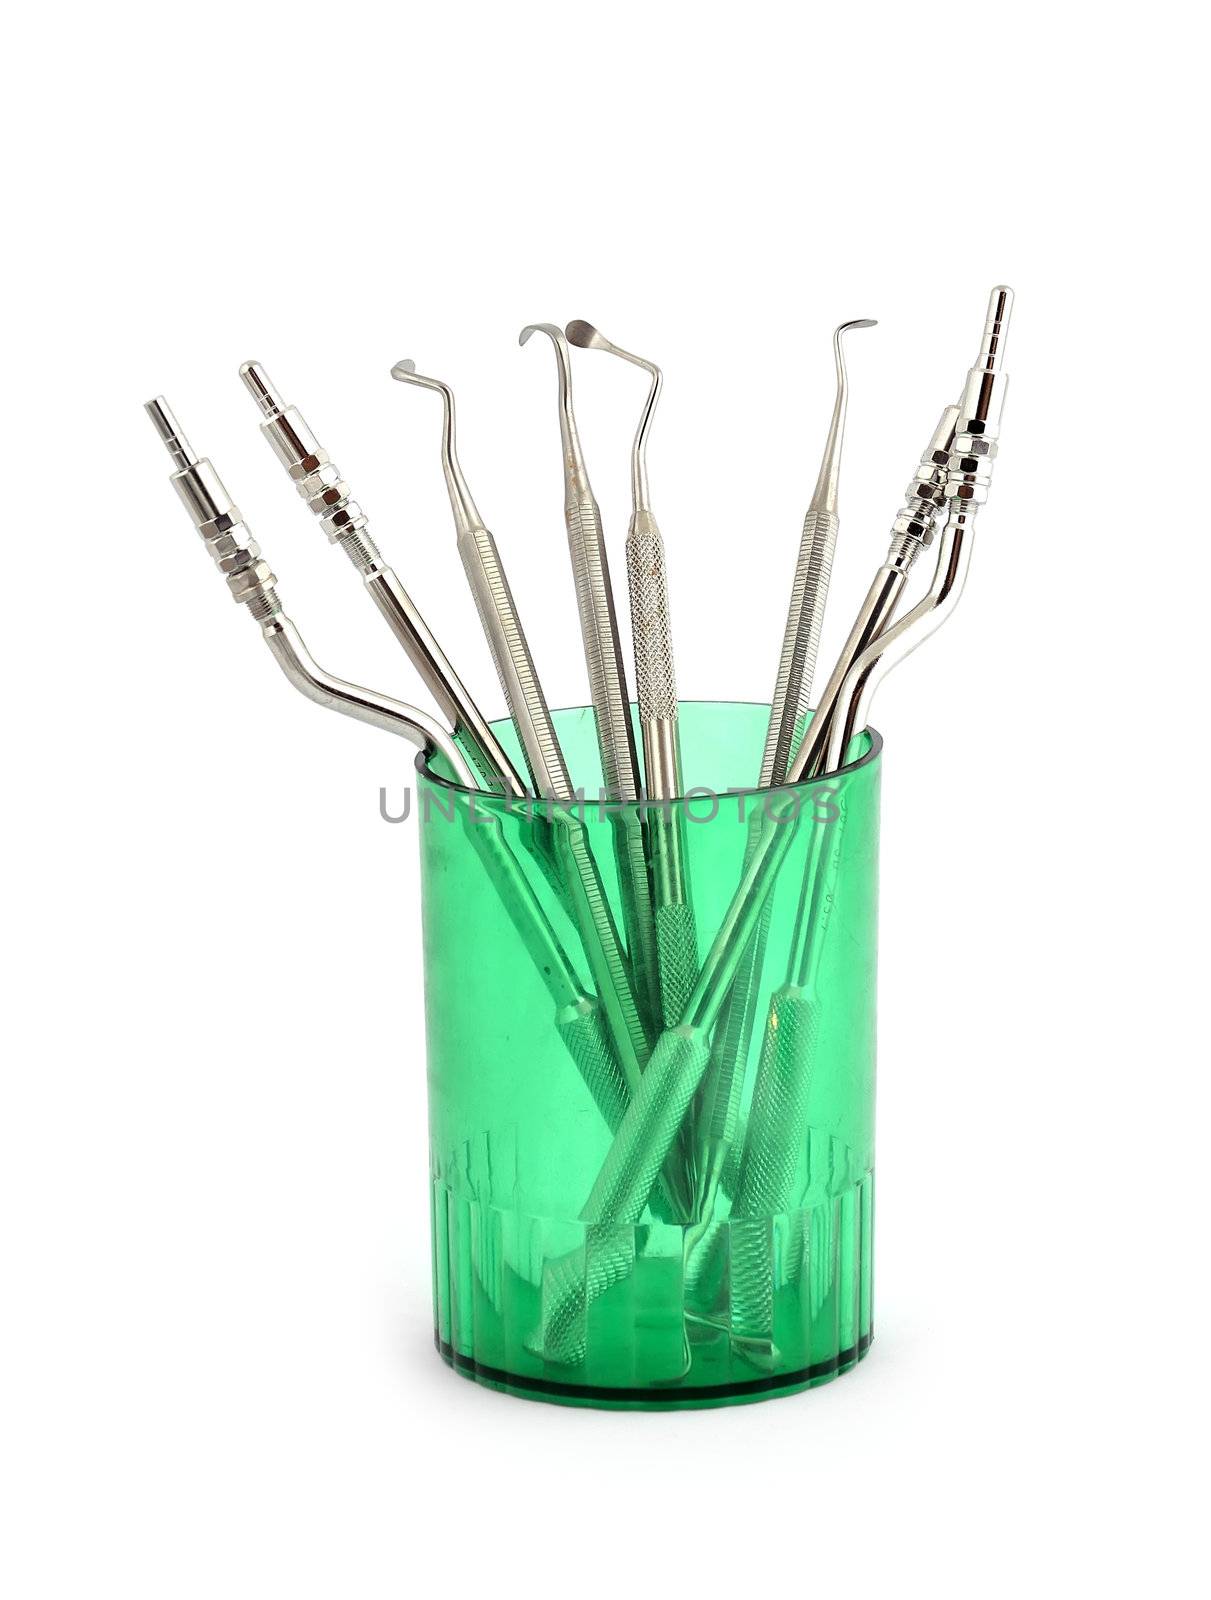 tools for sinus lifting by vetkit